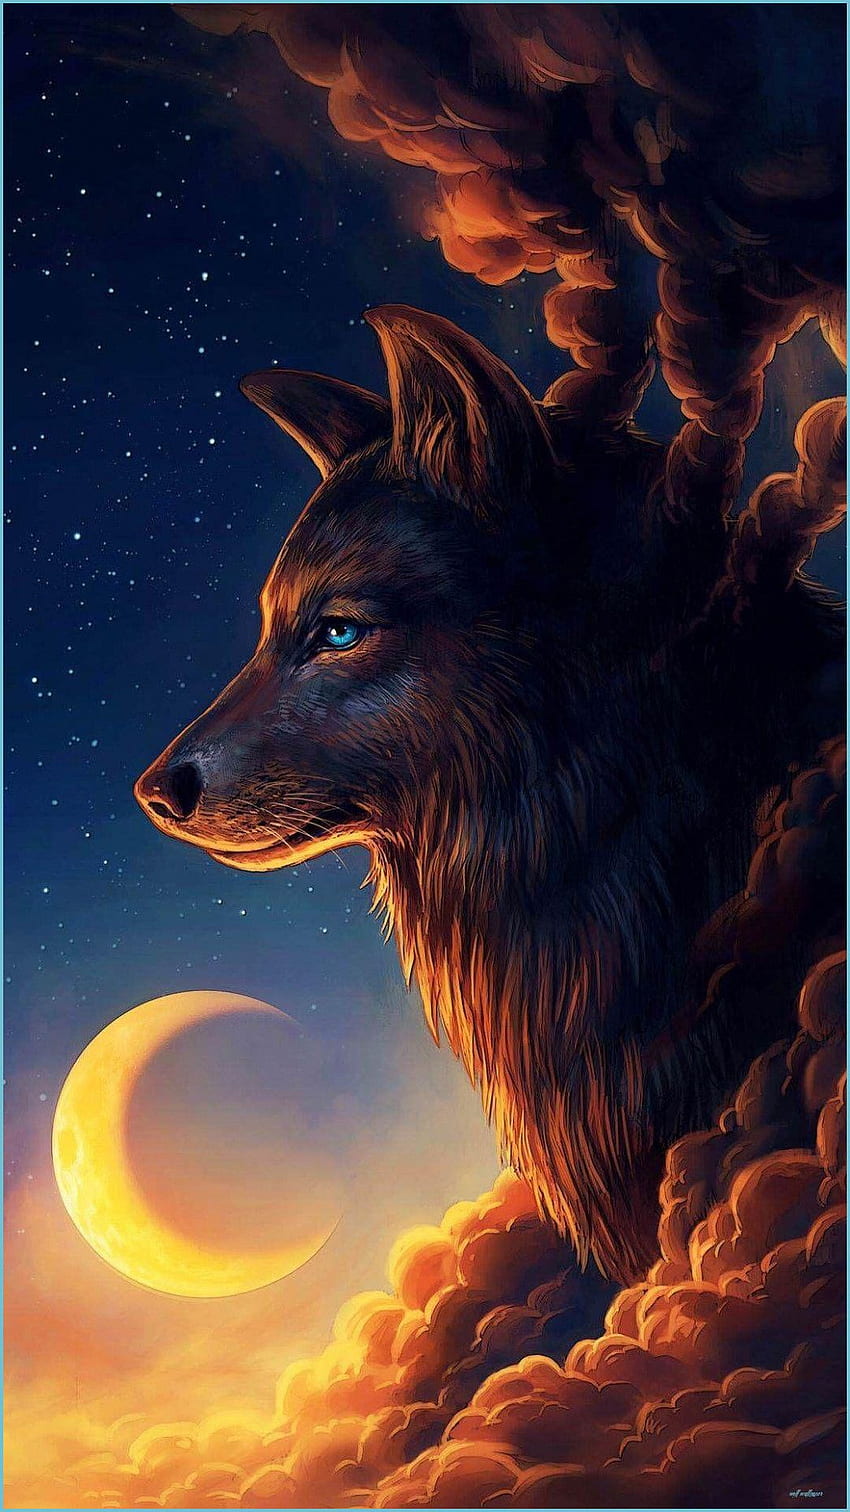 A wolf looking up at the moon in clouds - Wolf